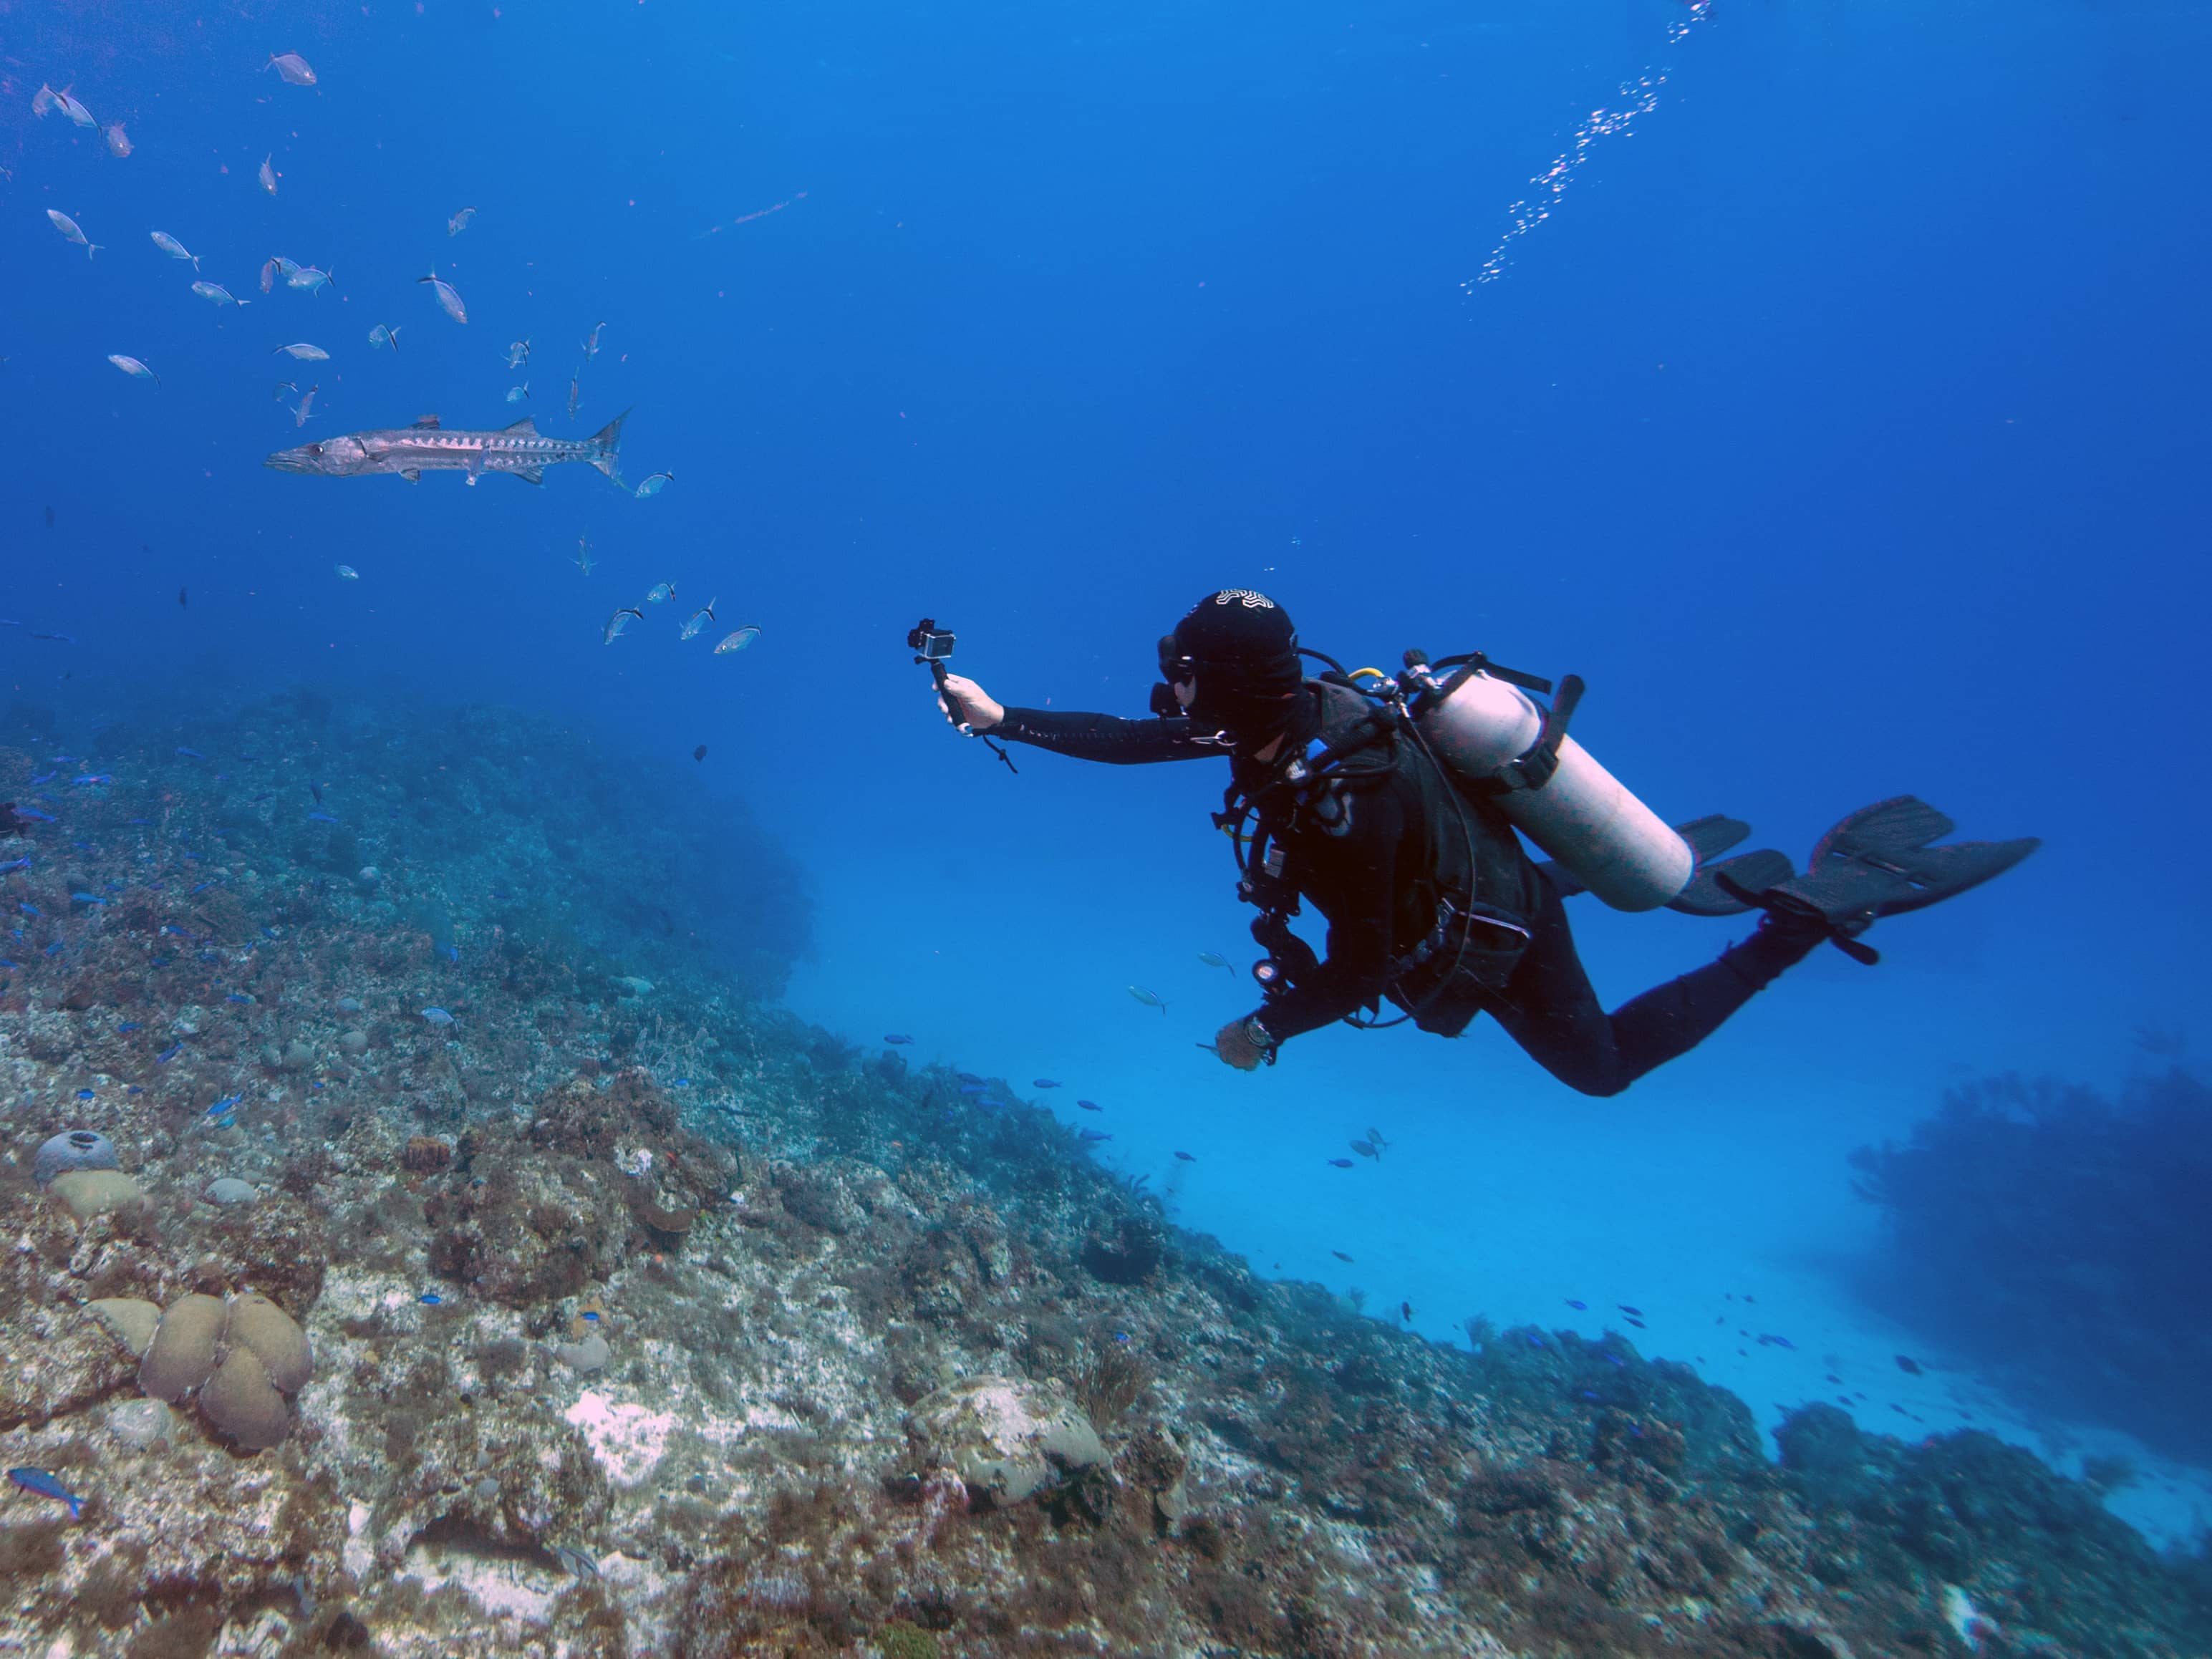 Dive into the crystal-clear waters of Tenerife and learn to scuba dive or rediscover this passion during your vacation.&nbsp;